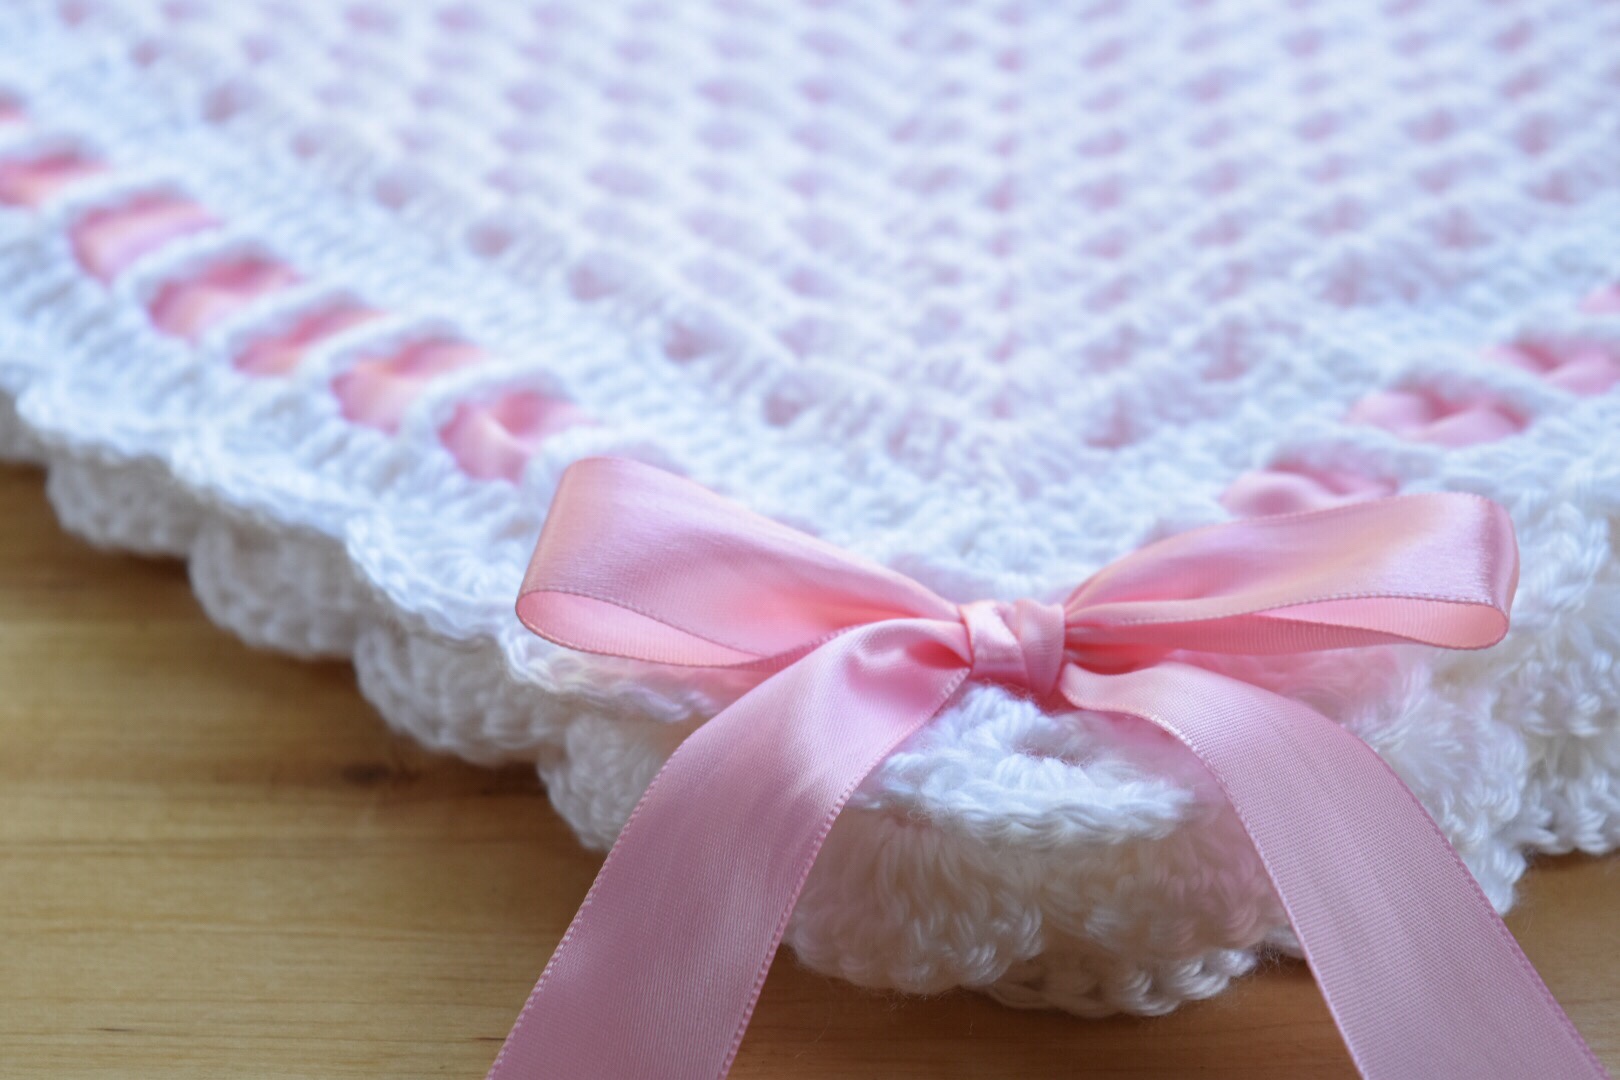 Sweet Georgia Heirloom Baby Blanket Crochet Pattern, Granny Square with Scalloped Border, Ribbon and Bow for Baby Girl or Baby Boy Nursery